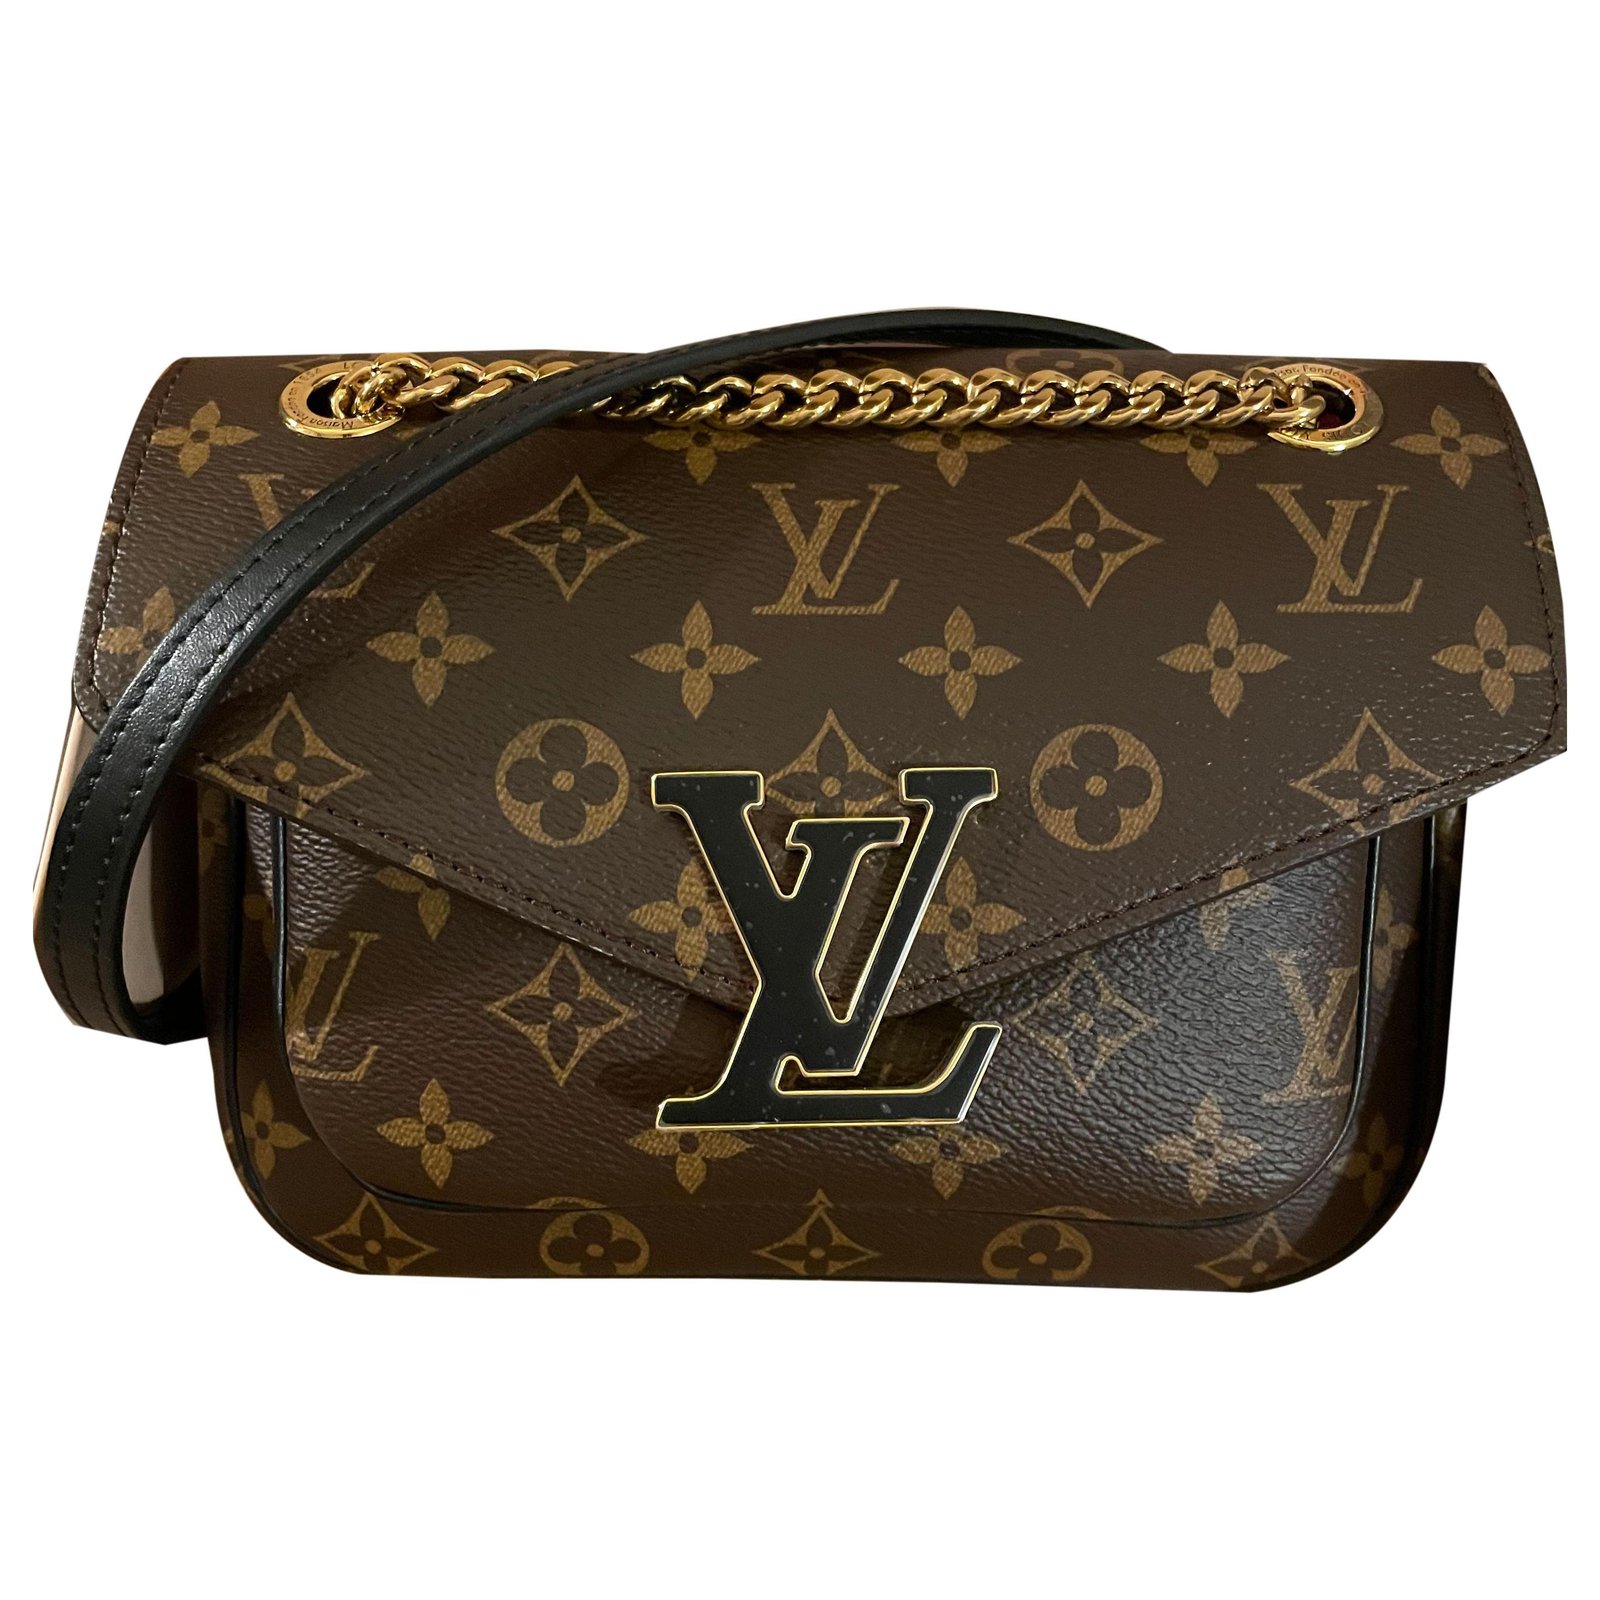 new lv bags